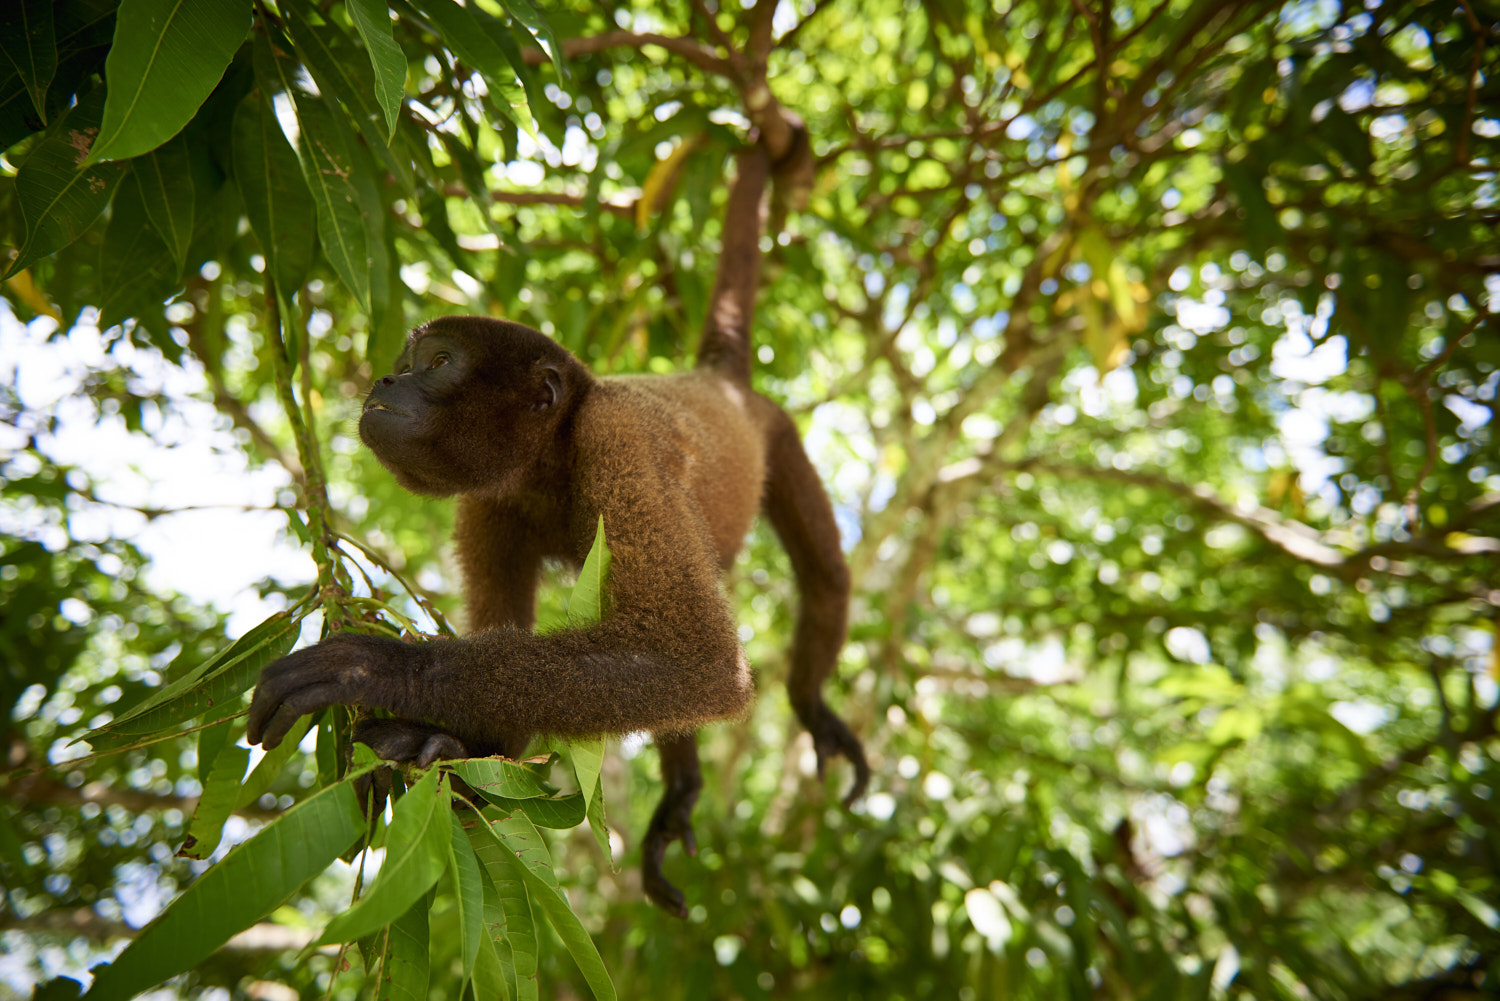 Amazon, Peru: Wide angle shot of wooly monkey suspending itself from a branch by its tail, inspecting the green leaves that surround him.